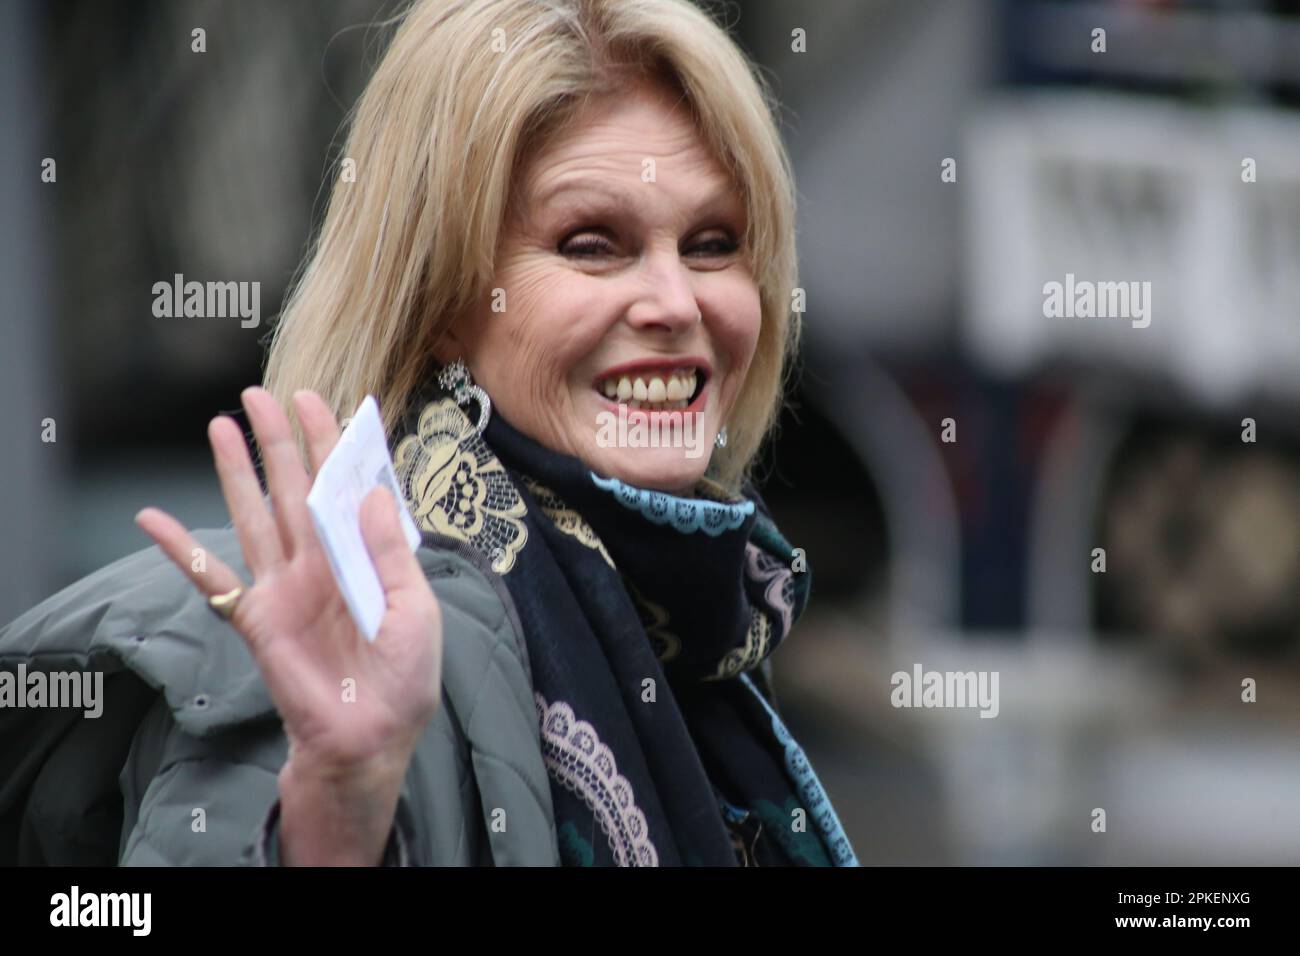 Newcastle upon Tyne, 7th April 2023, Dame Joanna Lumley seen at Newcastle train station, The British actress,  presenter, former model, author. Dame Joanna known for her TV roles as Patsy Stone in The Absolutely Fabulous, Purdey The New Avengers and Sapphire & Steel was visiting Gateshead near Newcastle upon Tyne for an exclusive Q&A about her life and career talking about her book 'A Queen for All Seasons' at the opening of British furniture retailer Barker and Stonehouse opens its new flagship store in Gateshead, Credit:DEW/Alamy Live News Stock Photo